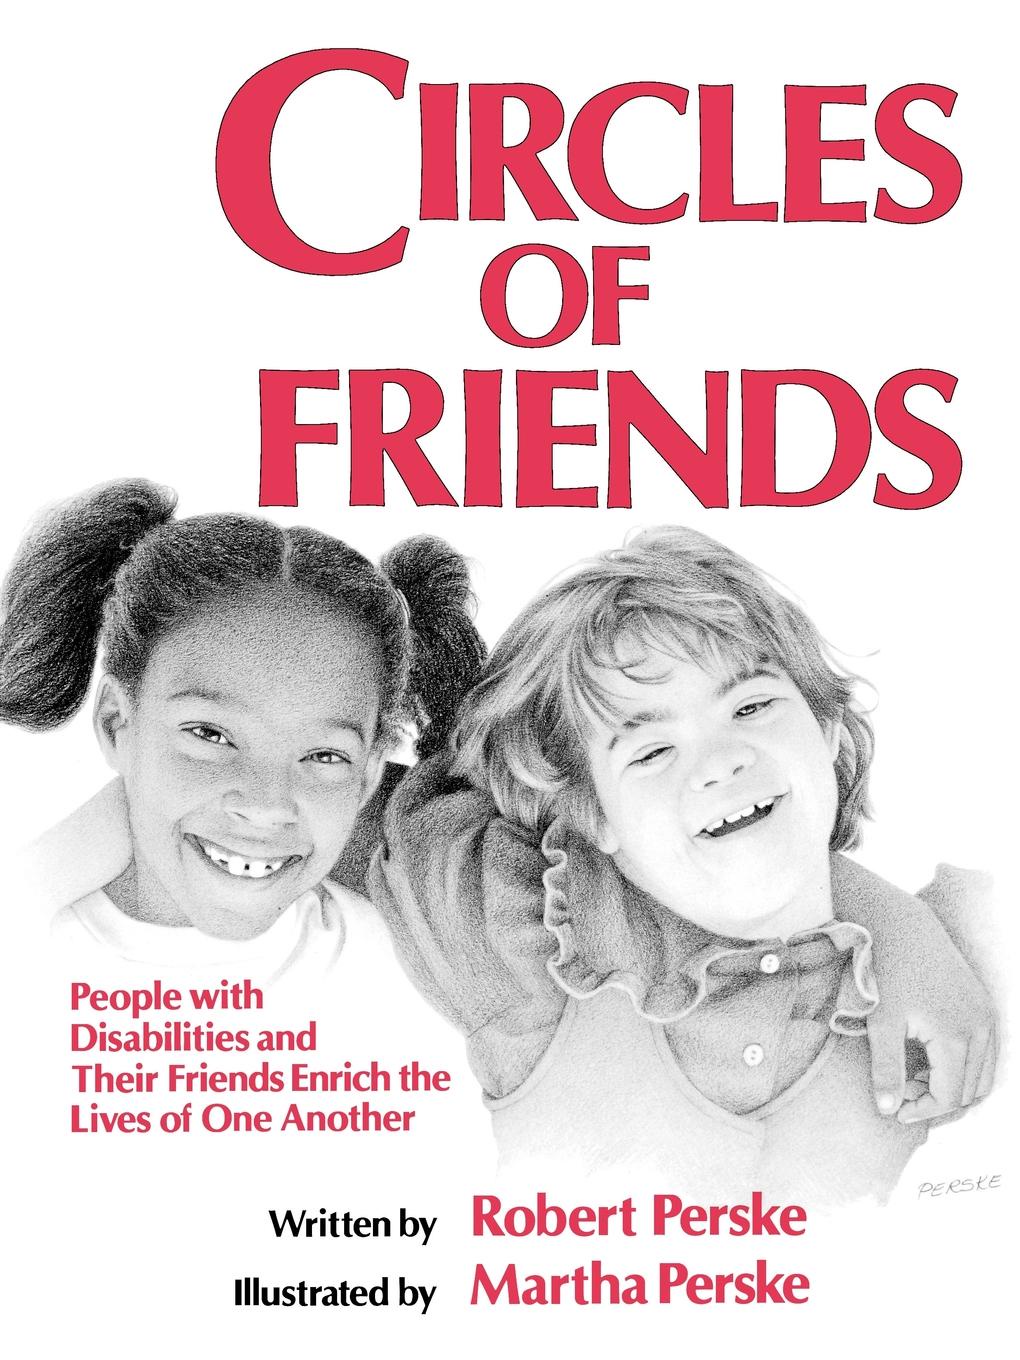 Circles of Friends. People with Disabilities and Their Friends Enrich the Lives of One Another